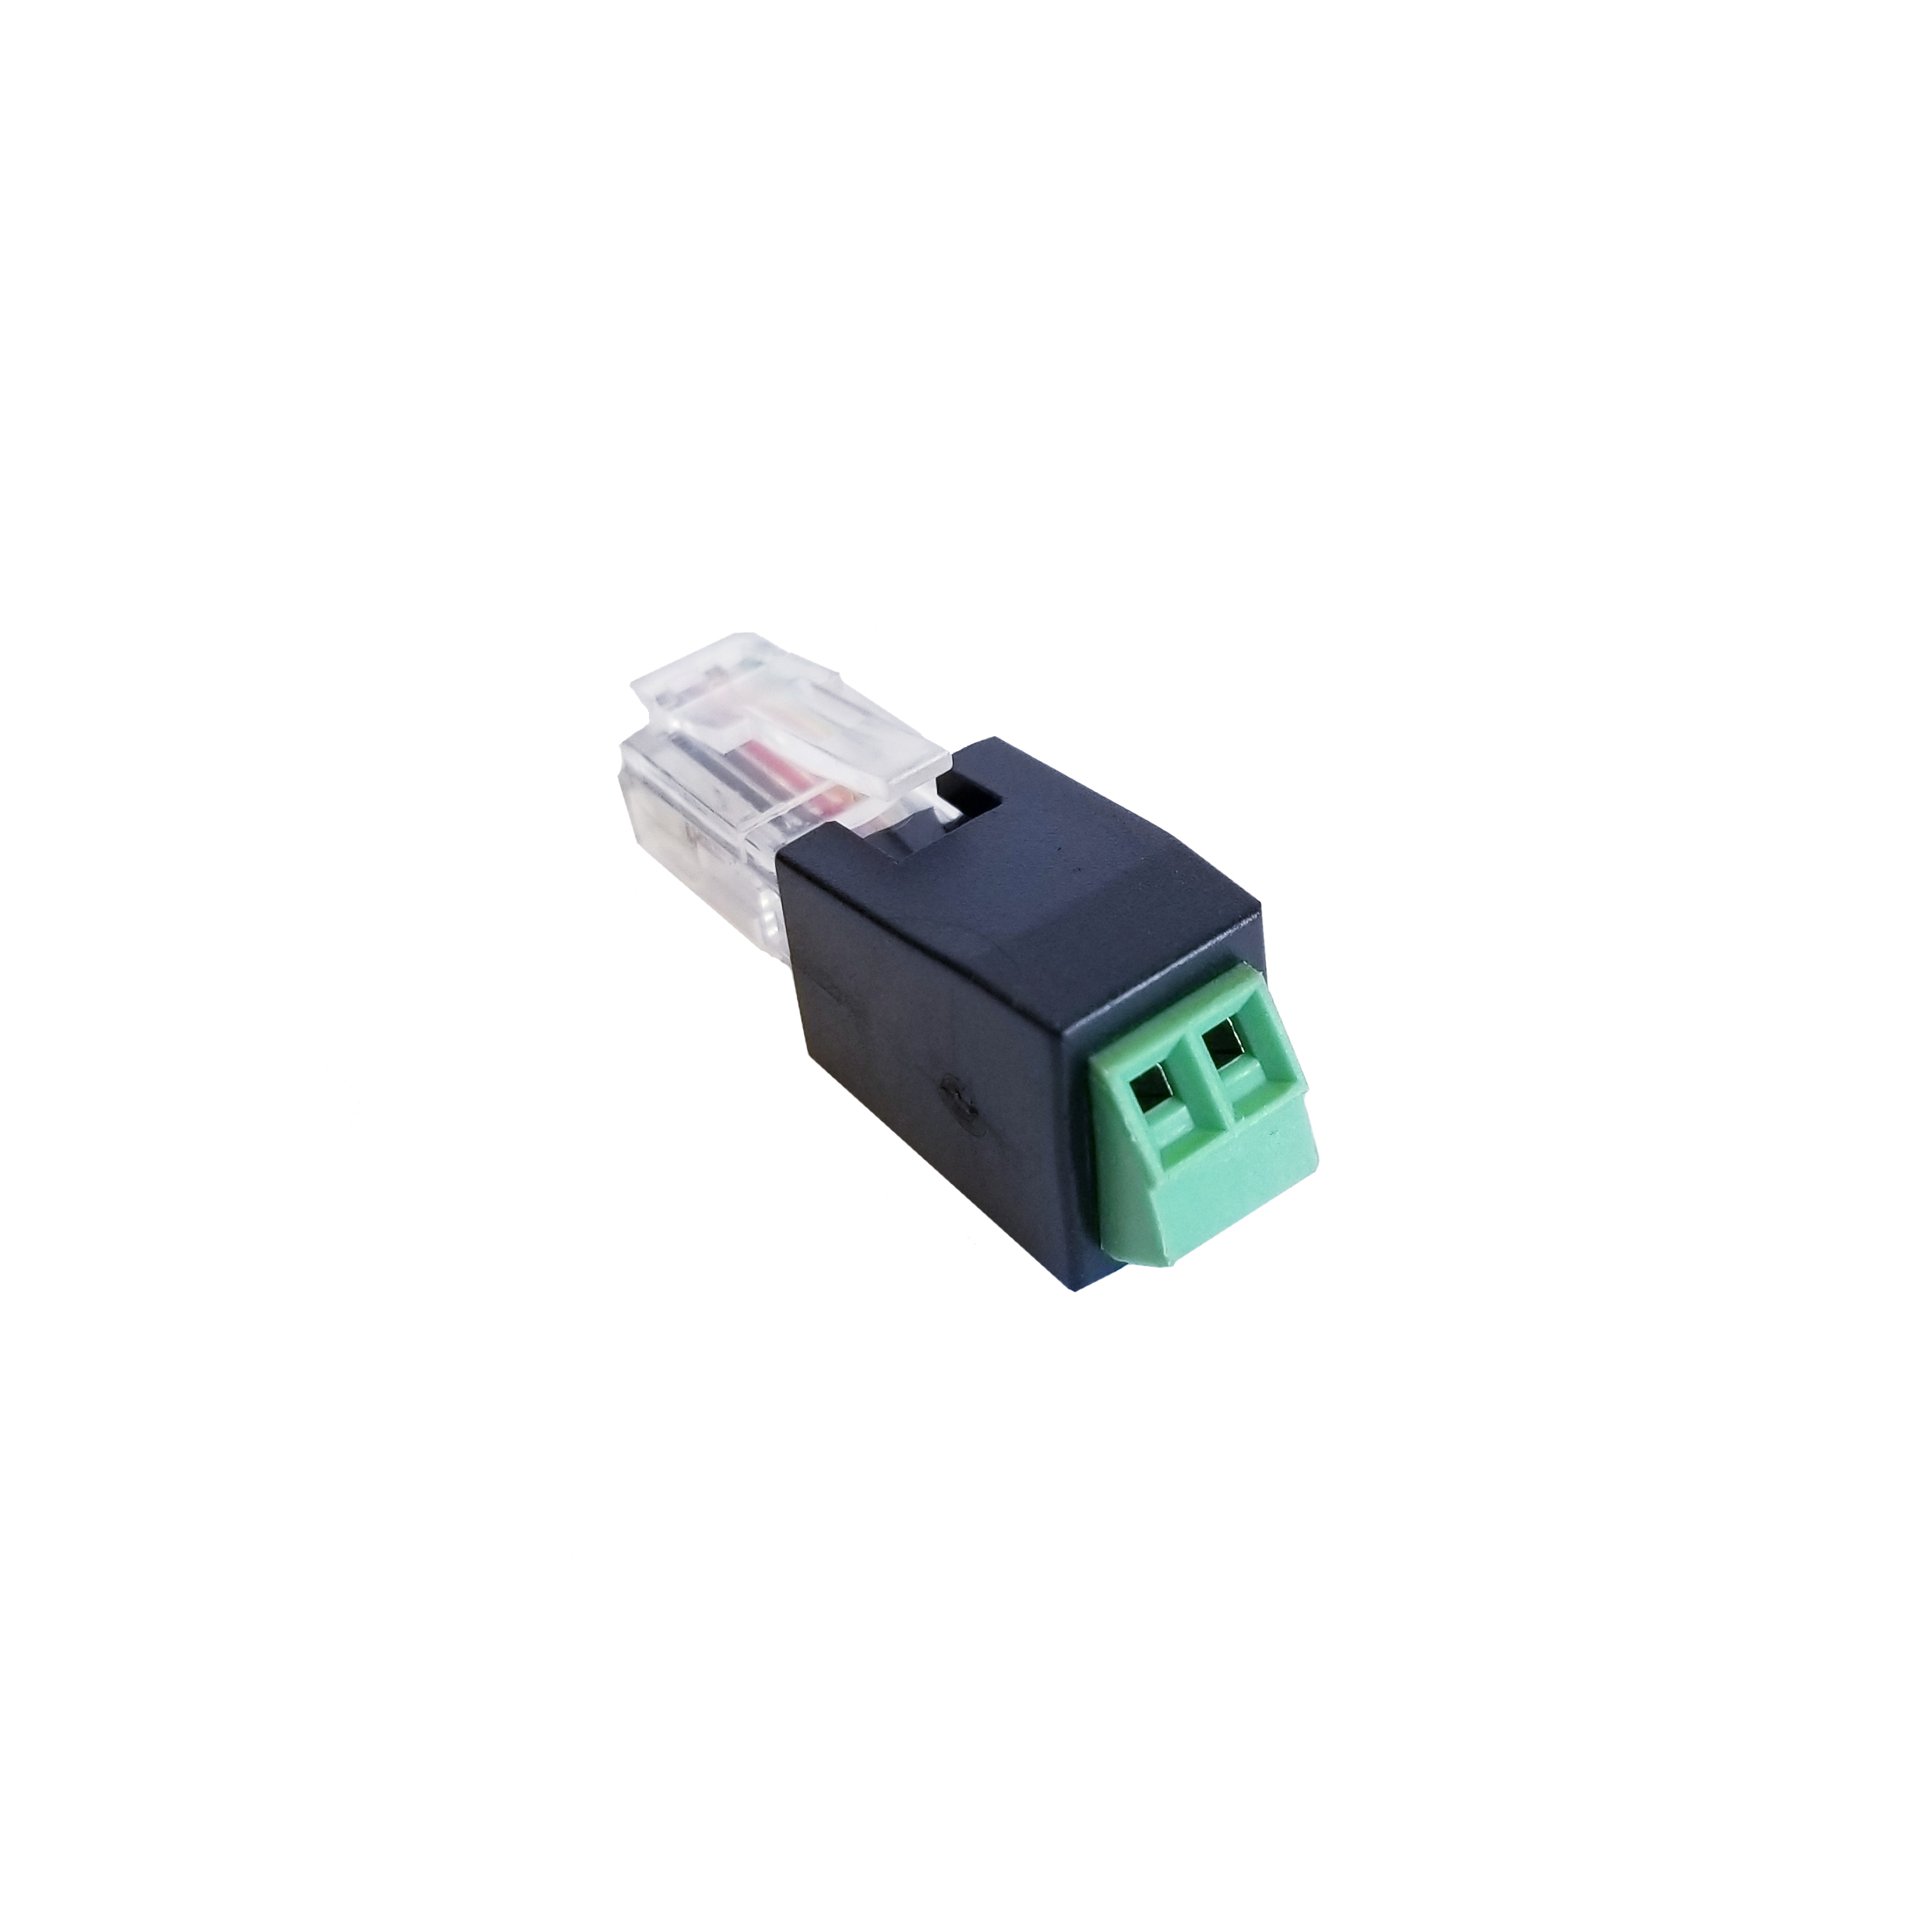 Phybridge RJ11 to 2 position screw terminal adapter, for outbound 1 pair cable connection **4-er Pack**